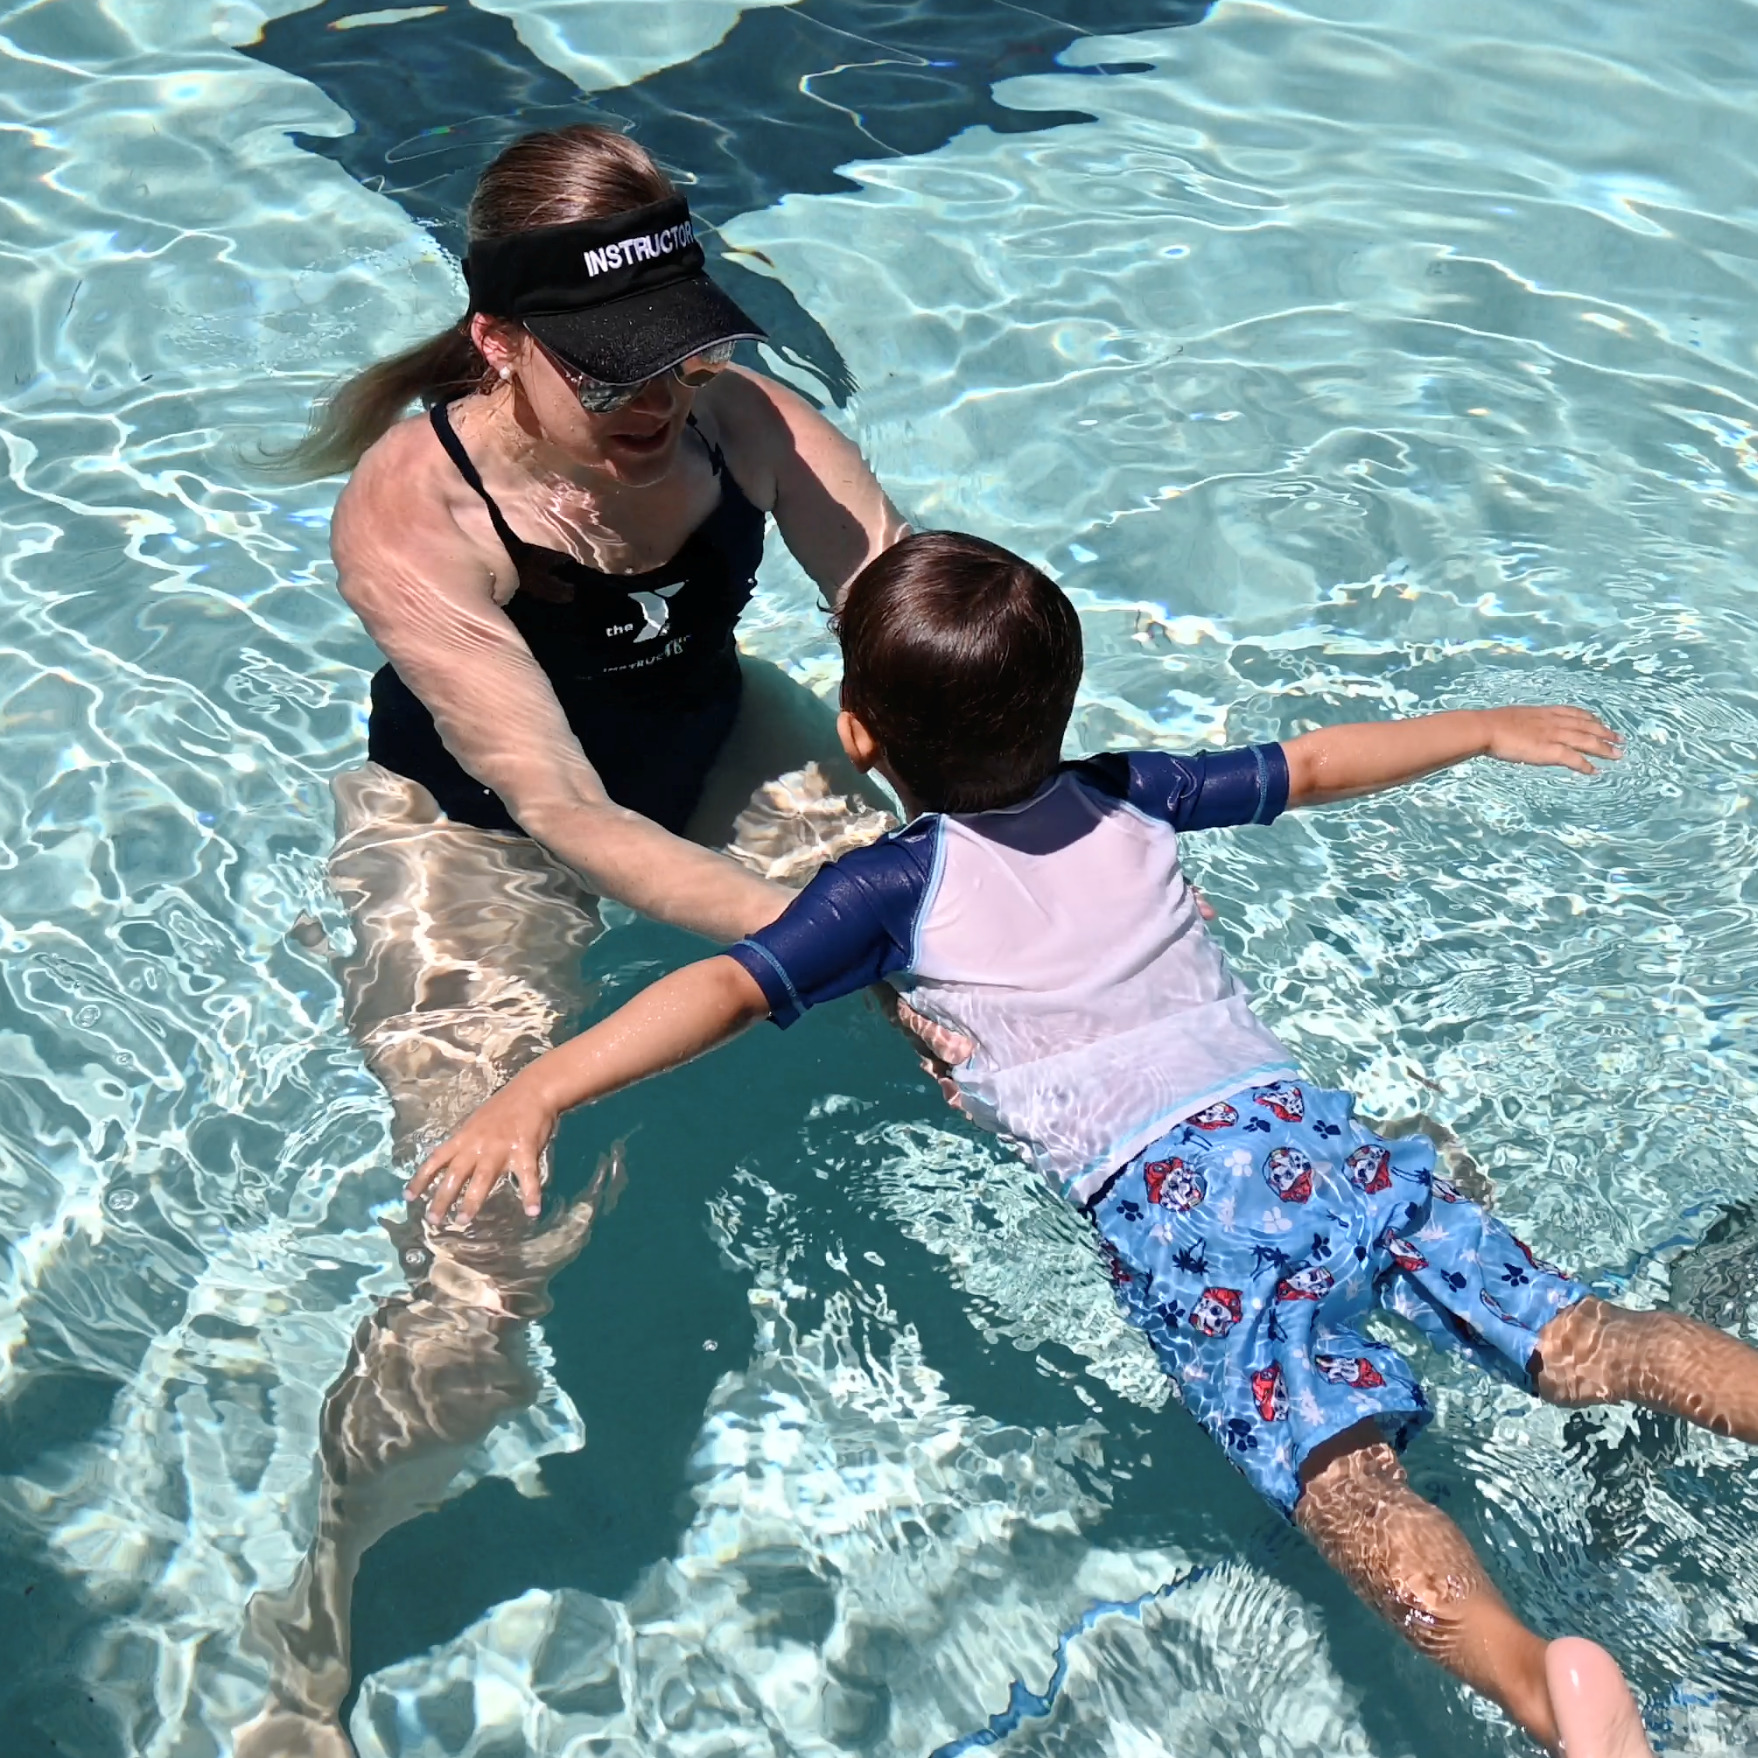 Children Can Learn To Swim And Be Safe Around Water This Spring Break At The Y Osprey Observer